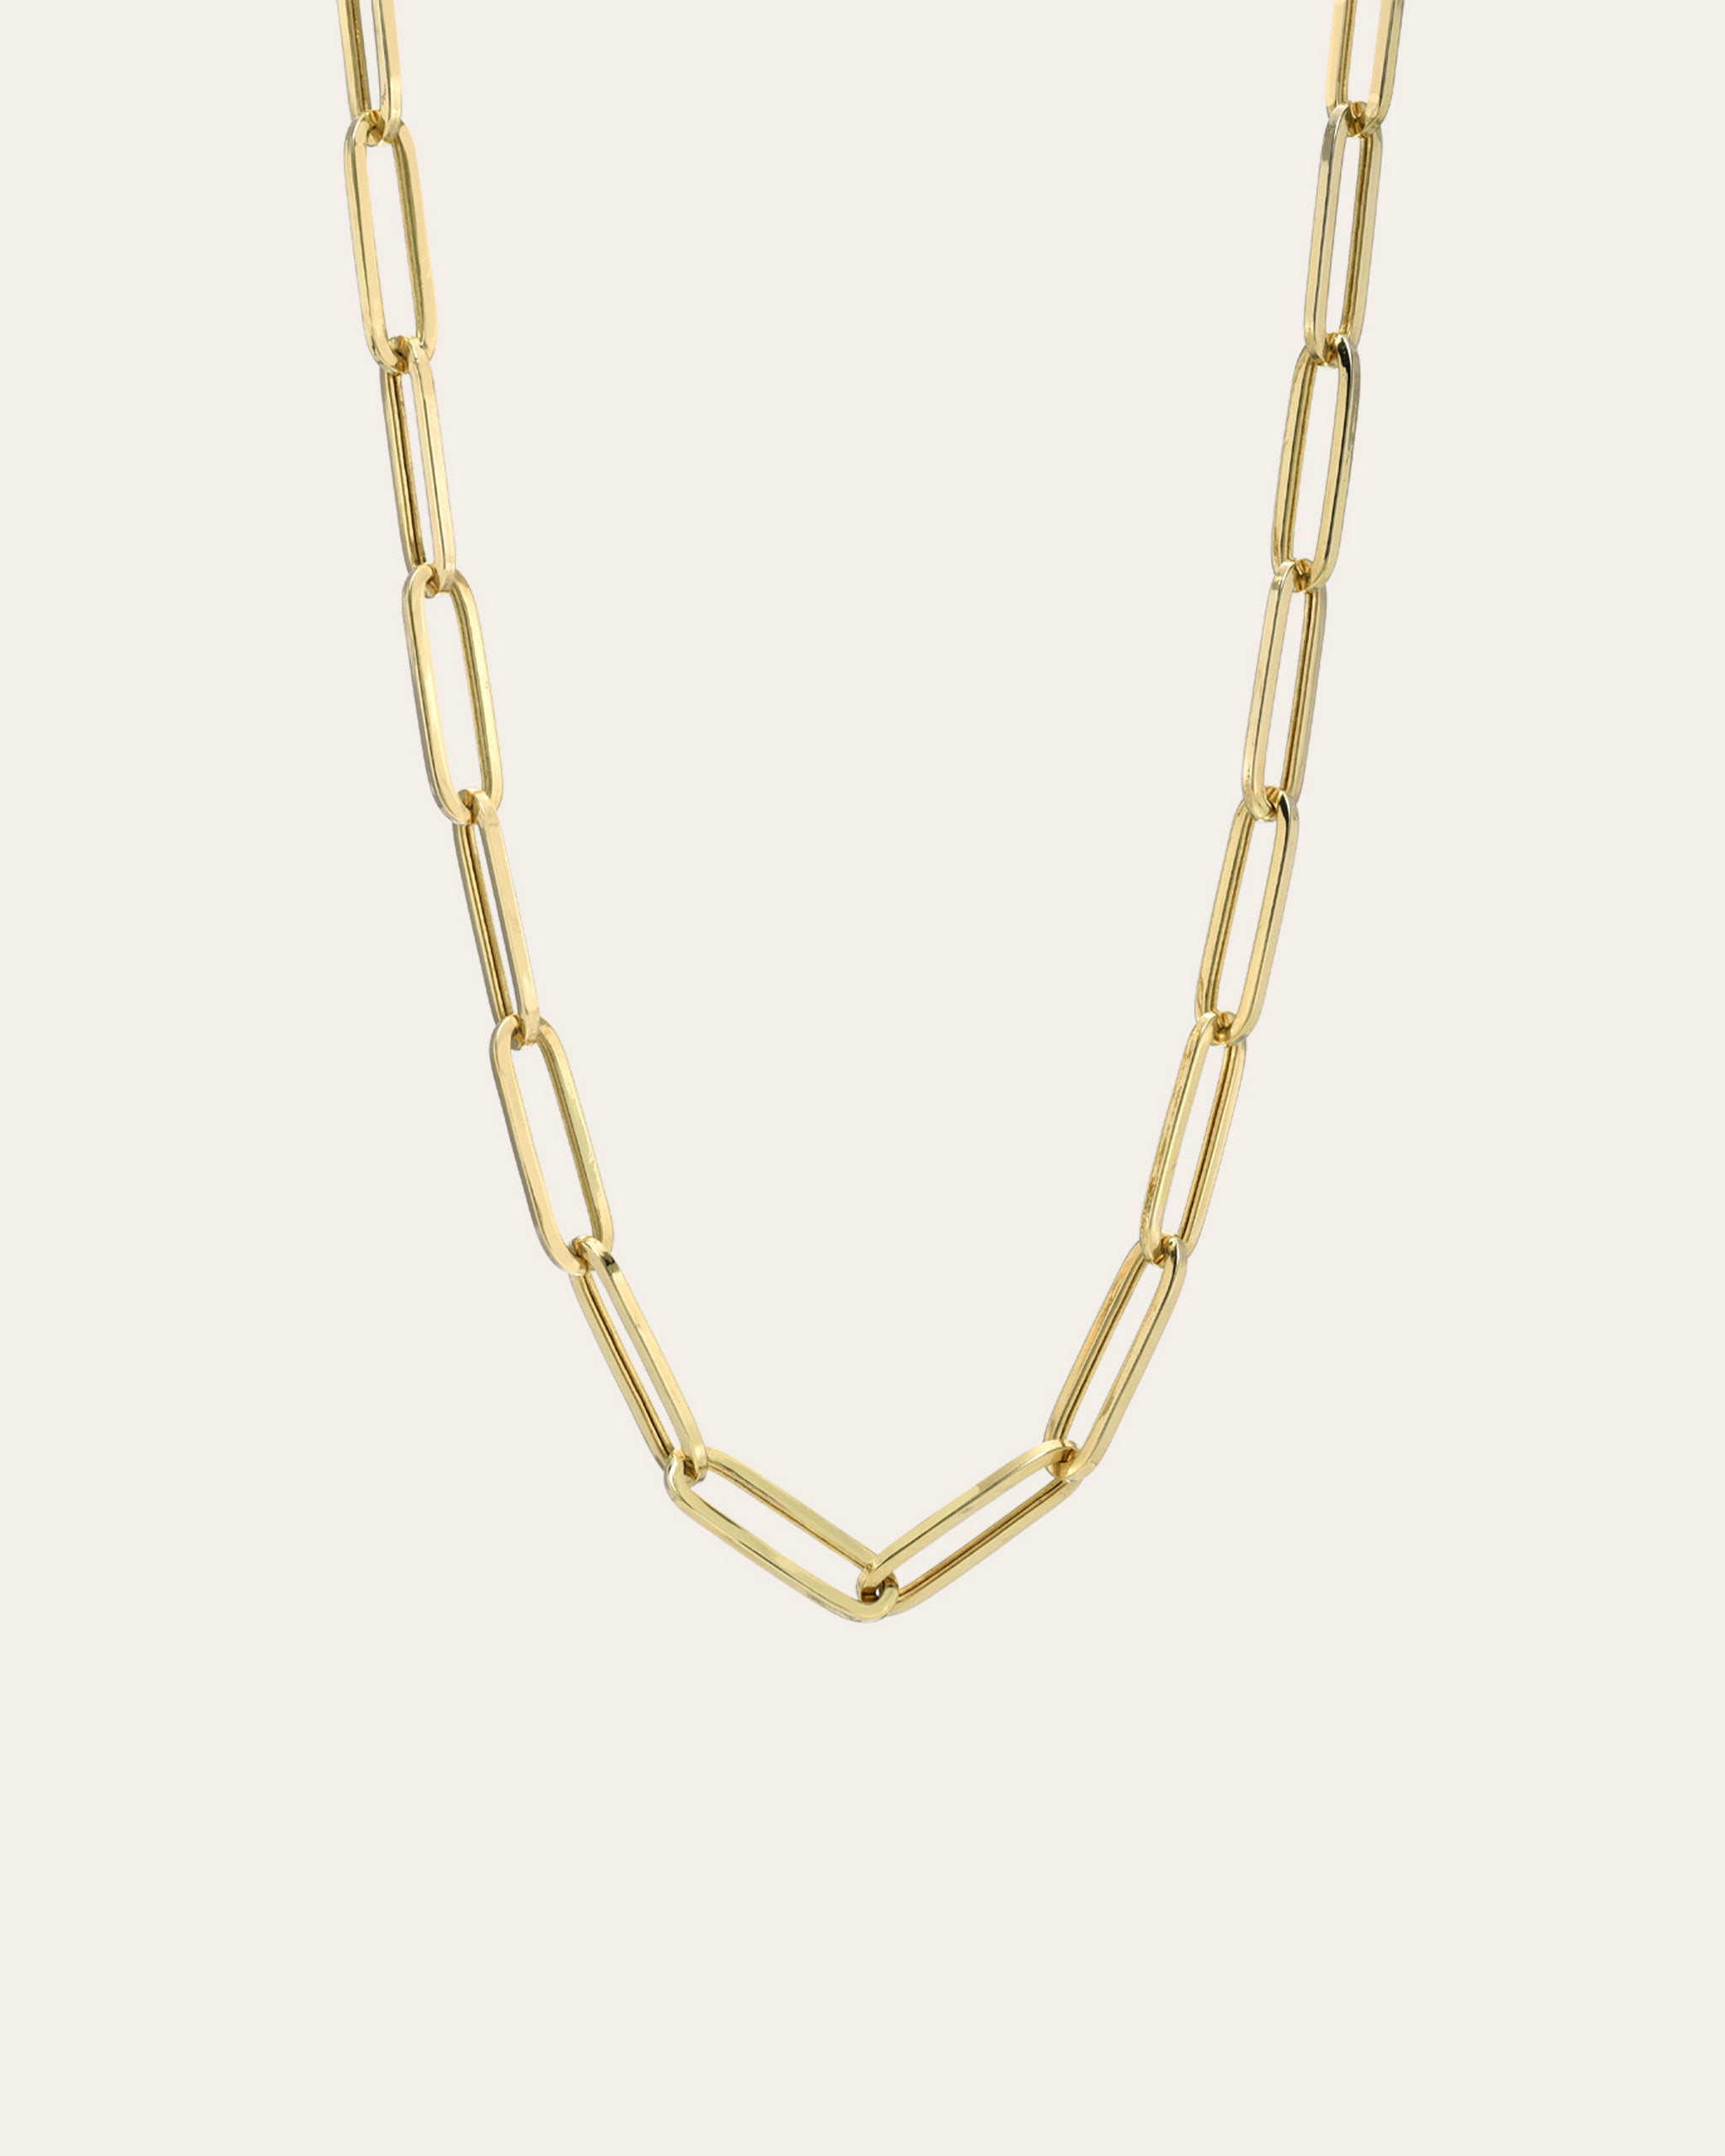 14K Gold Large Paper Clip Chain Necklace 14K White Gold / 18'' +$70.00